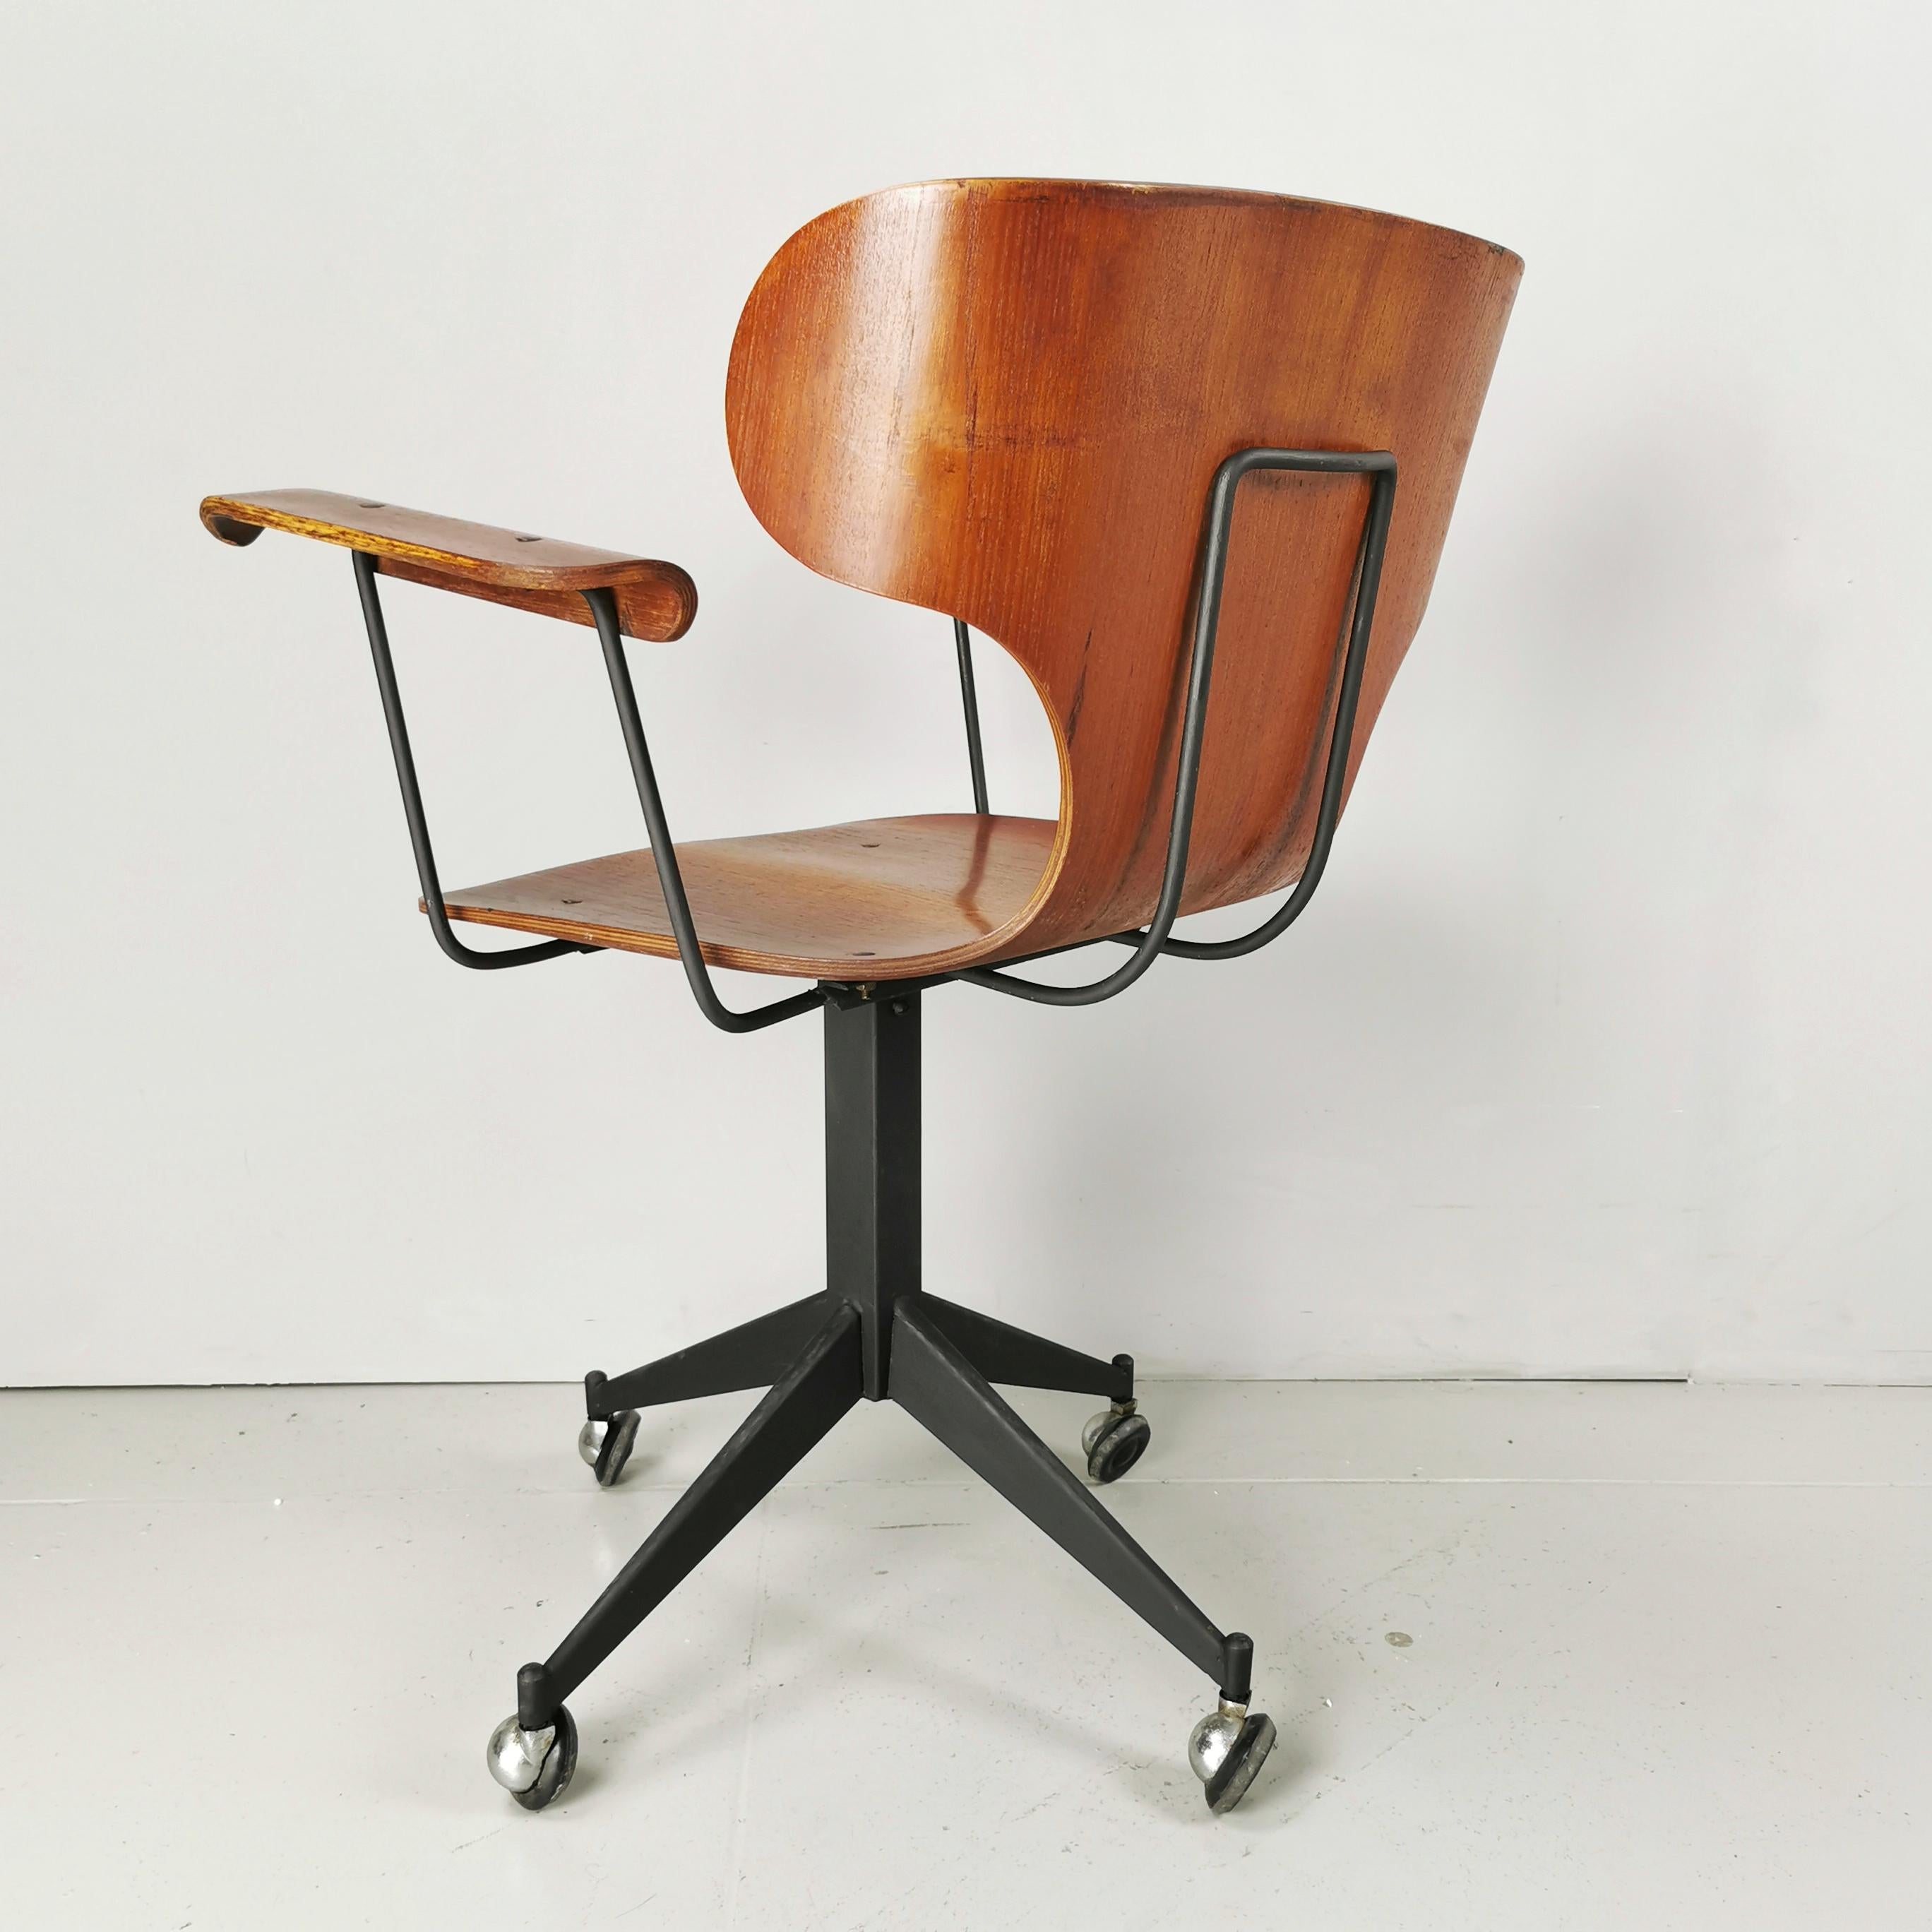 rare 50s/60s curved wood chair office desk In Good Condition For Sale In Milano, MI